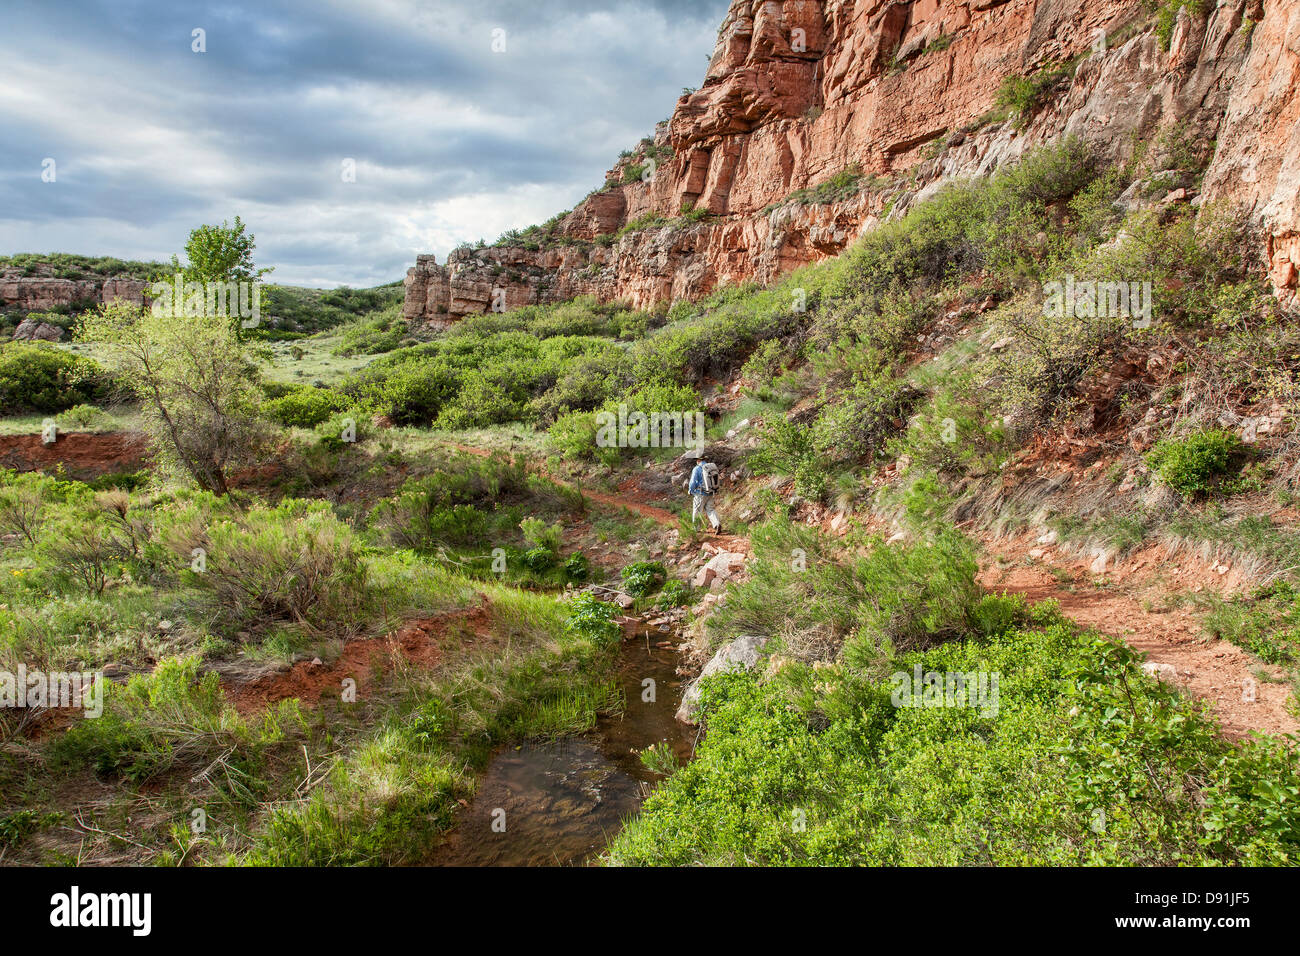 senior male backpacker hiking through sandstone canyon with a stream and green lush vegetation, Stock Photo